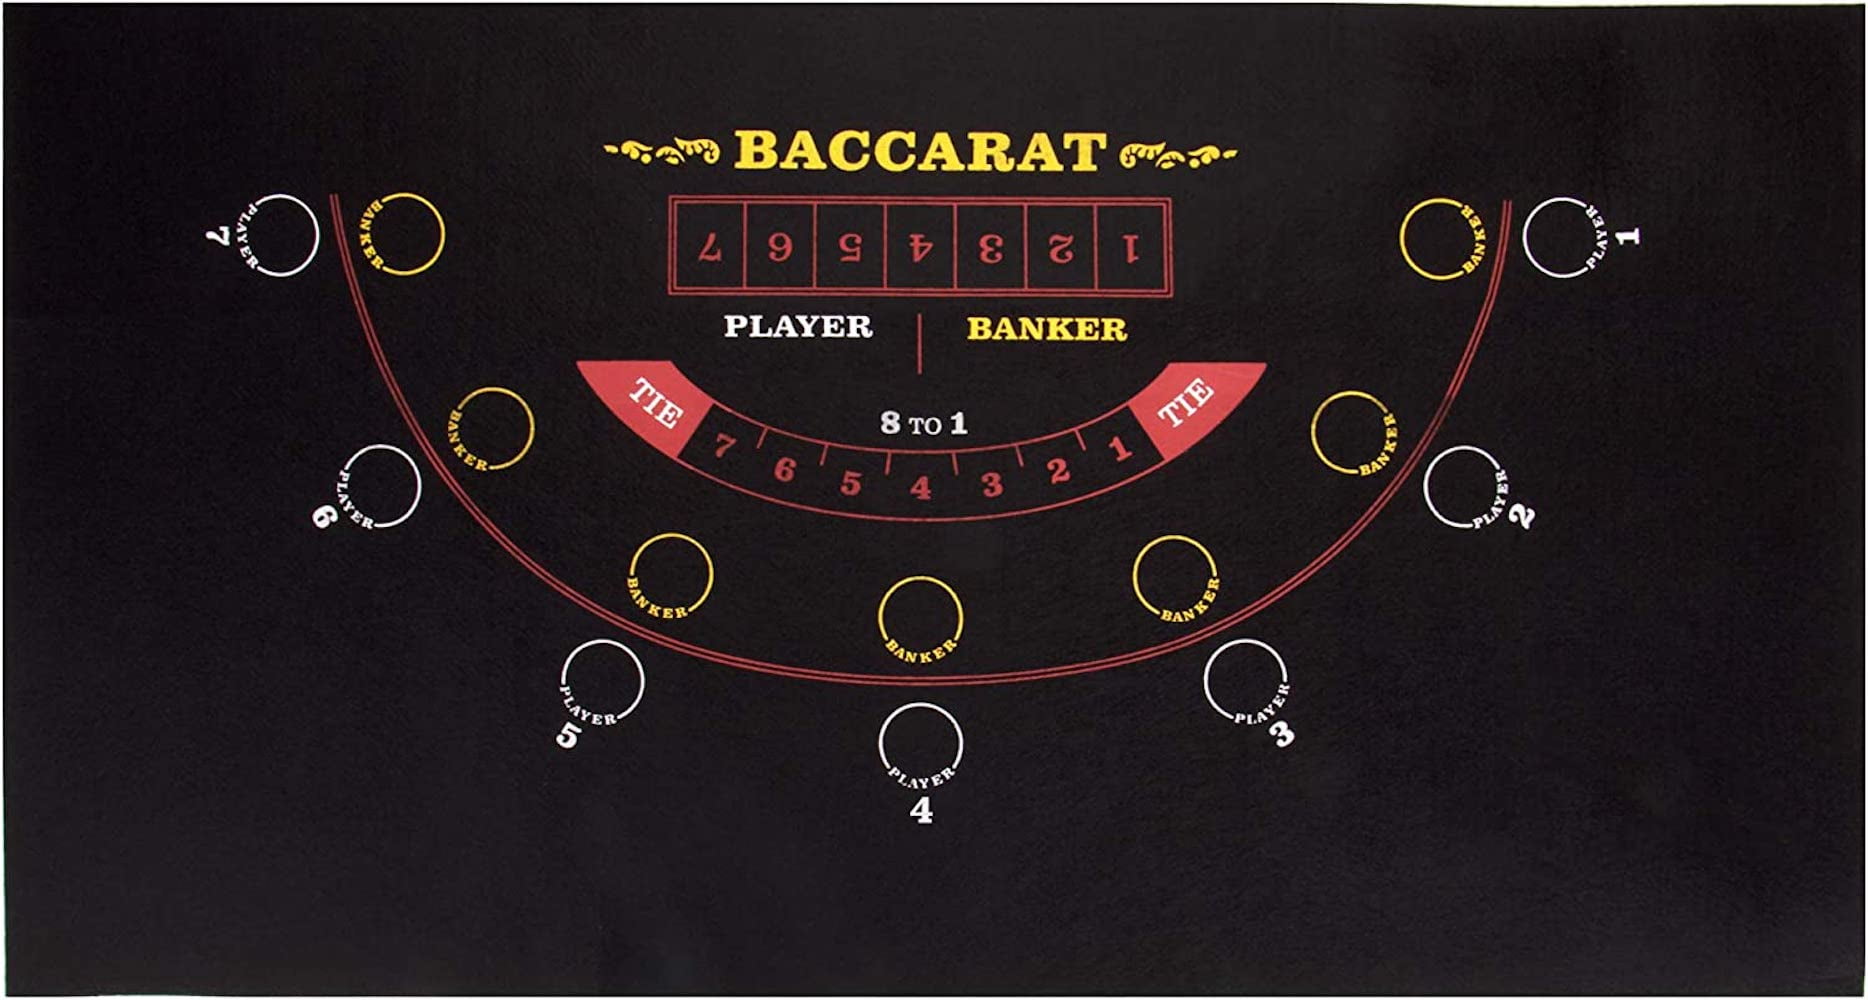 Picture of Brybelly GFEL-605 36 x 18 in. Baccarat Casino Felt Mat